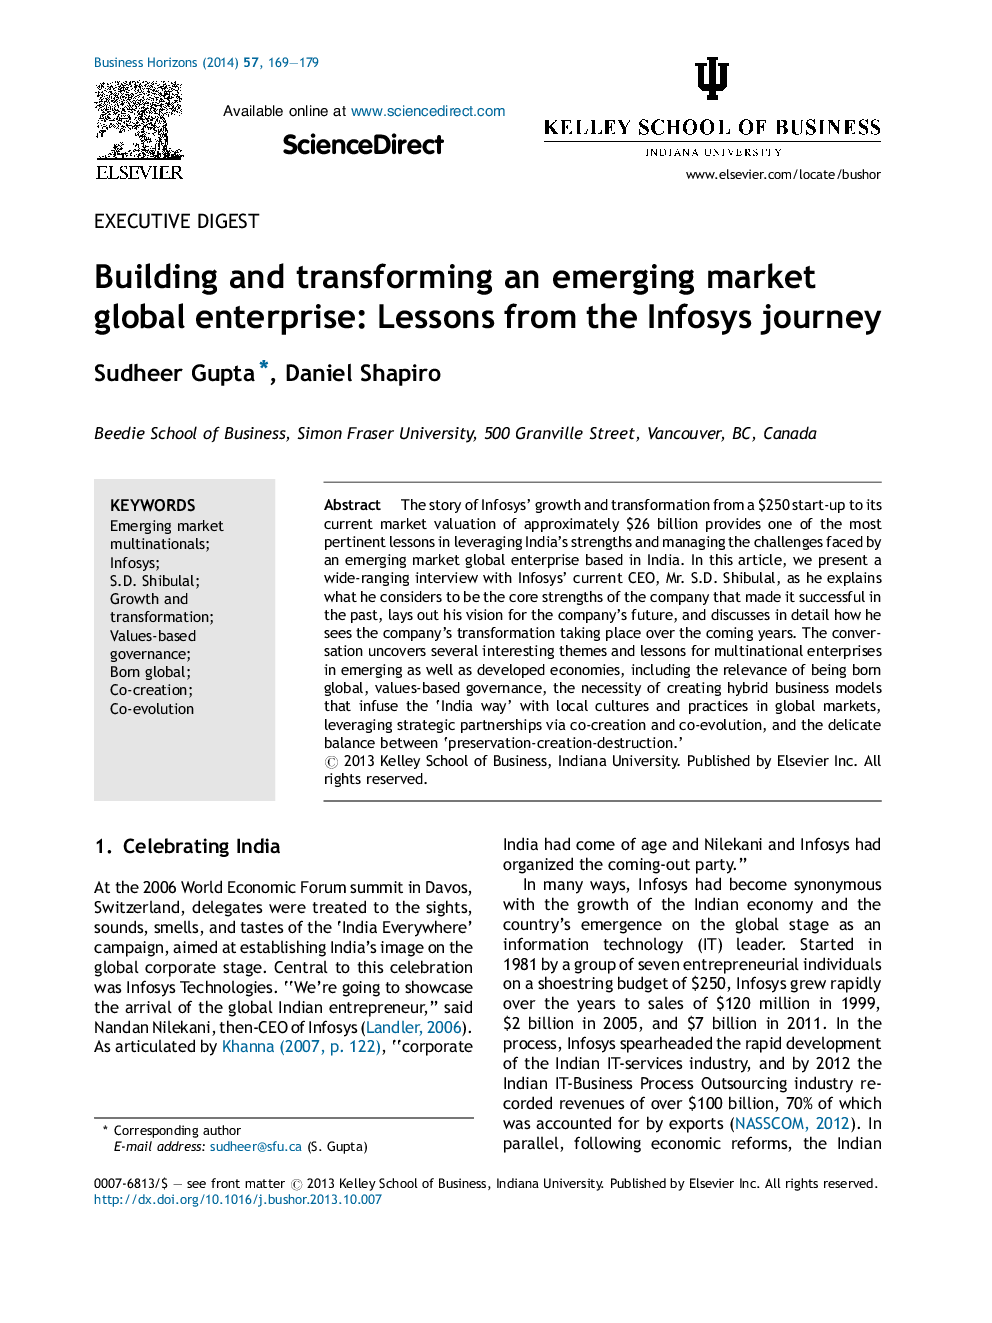 Building and transforming an emerging market global enterprise: Lessons from the Infosys journey